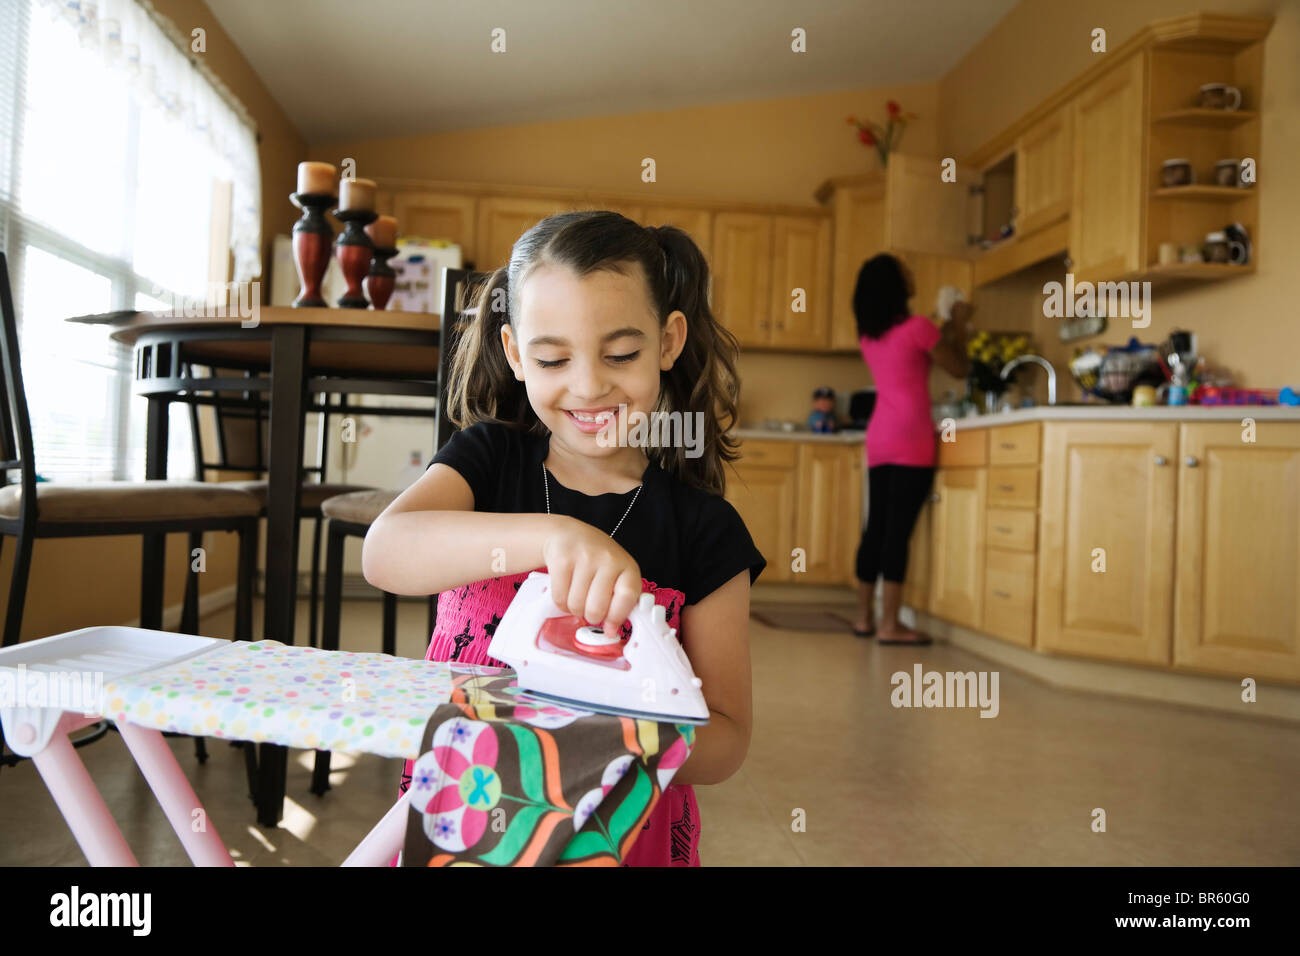 Girl using toy iron and ironing board in kitchen Stock Photo